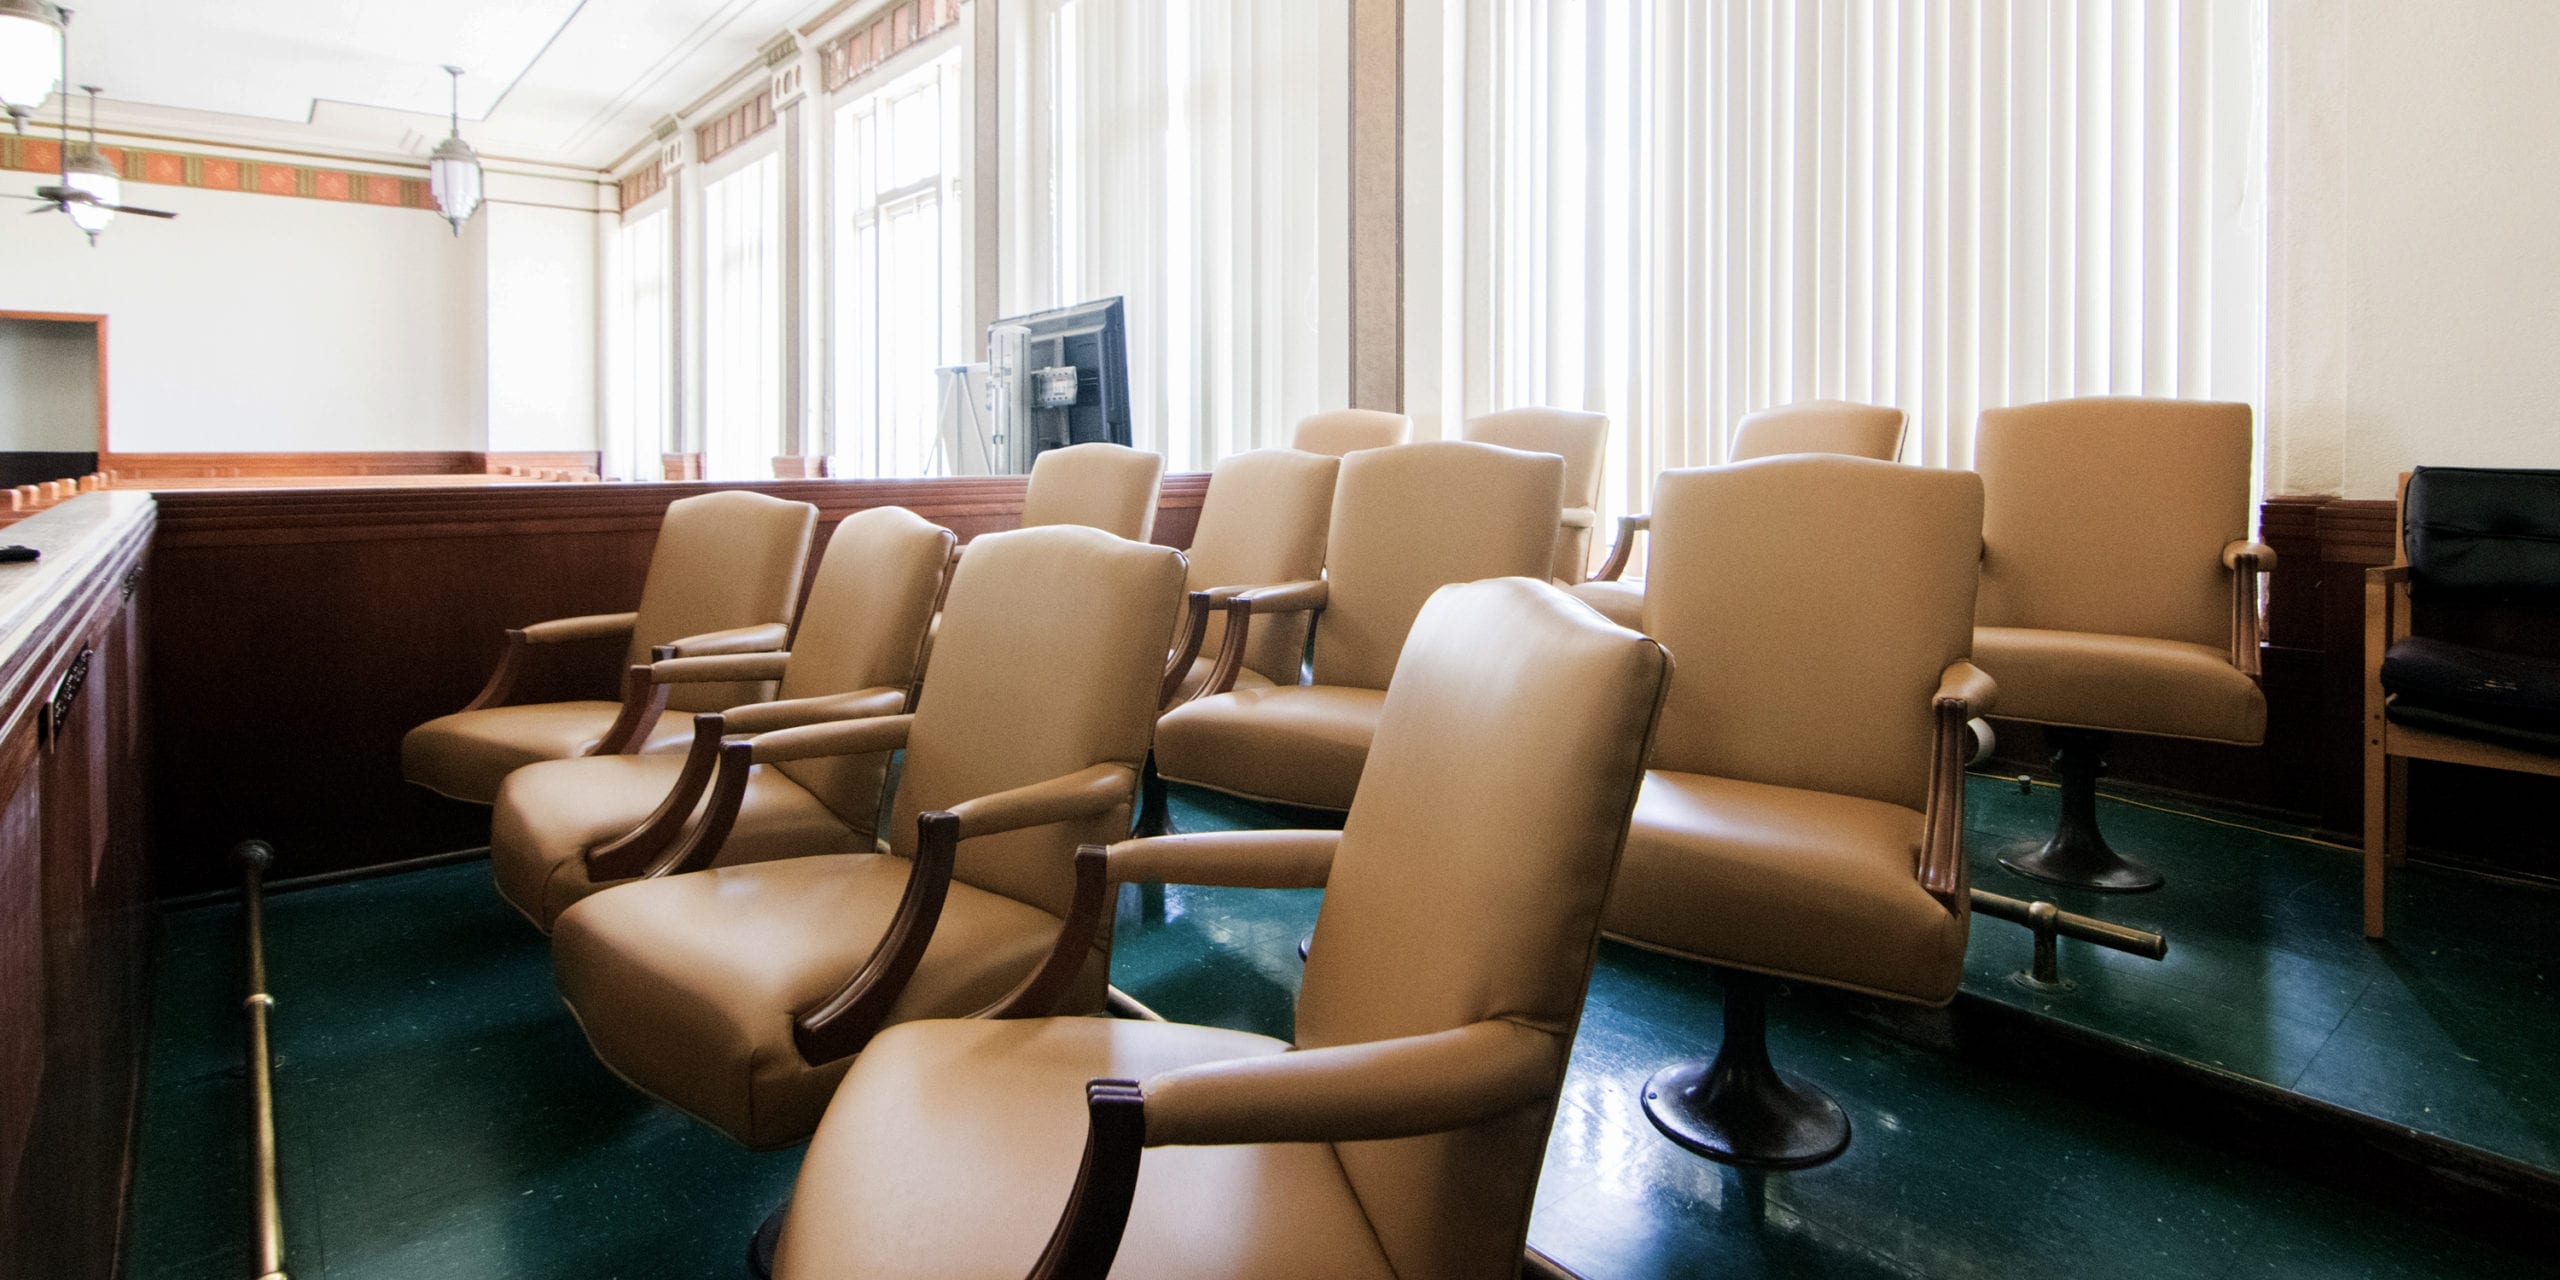 Chairs in a jury box. Photo by Flickr user Patrick Feller.